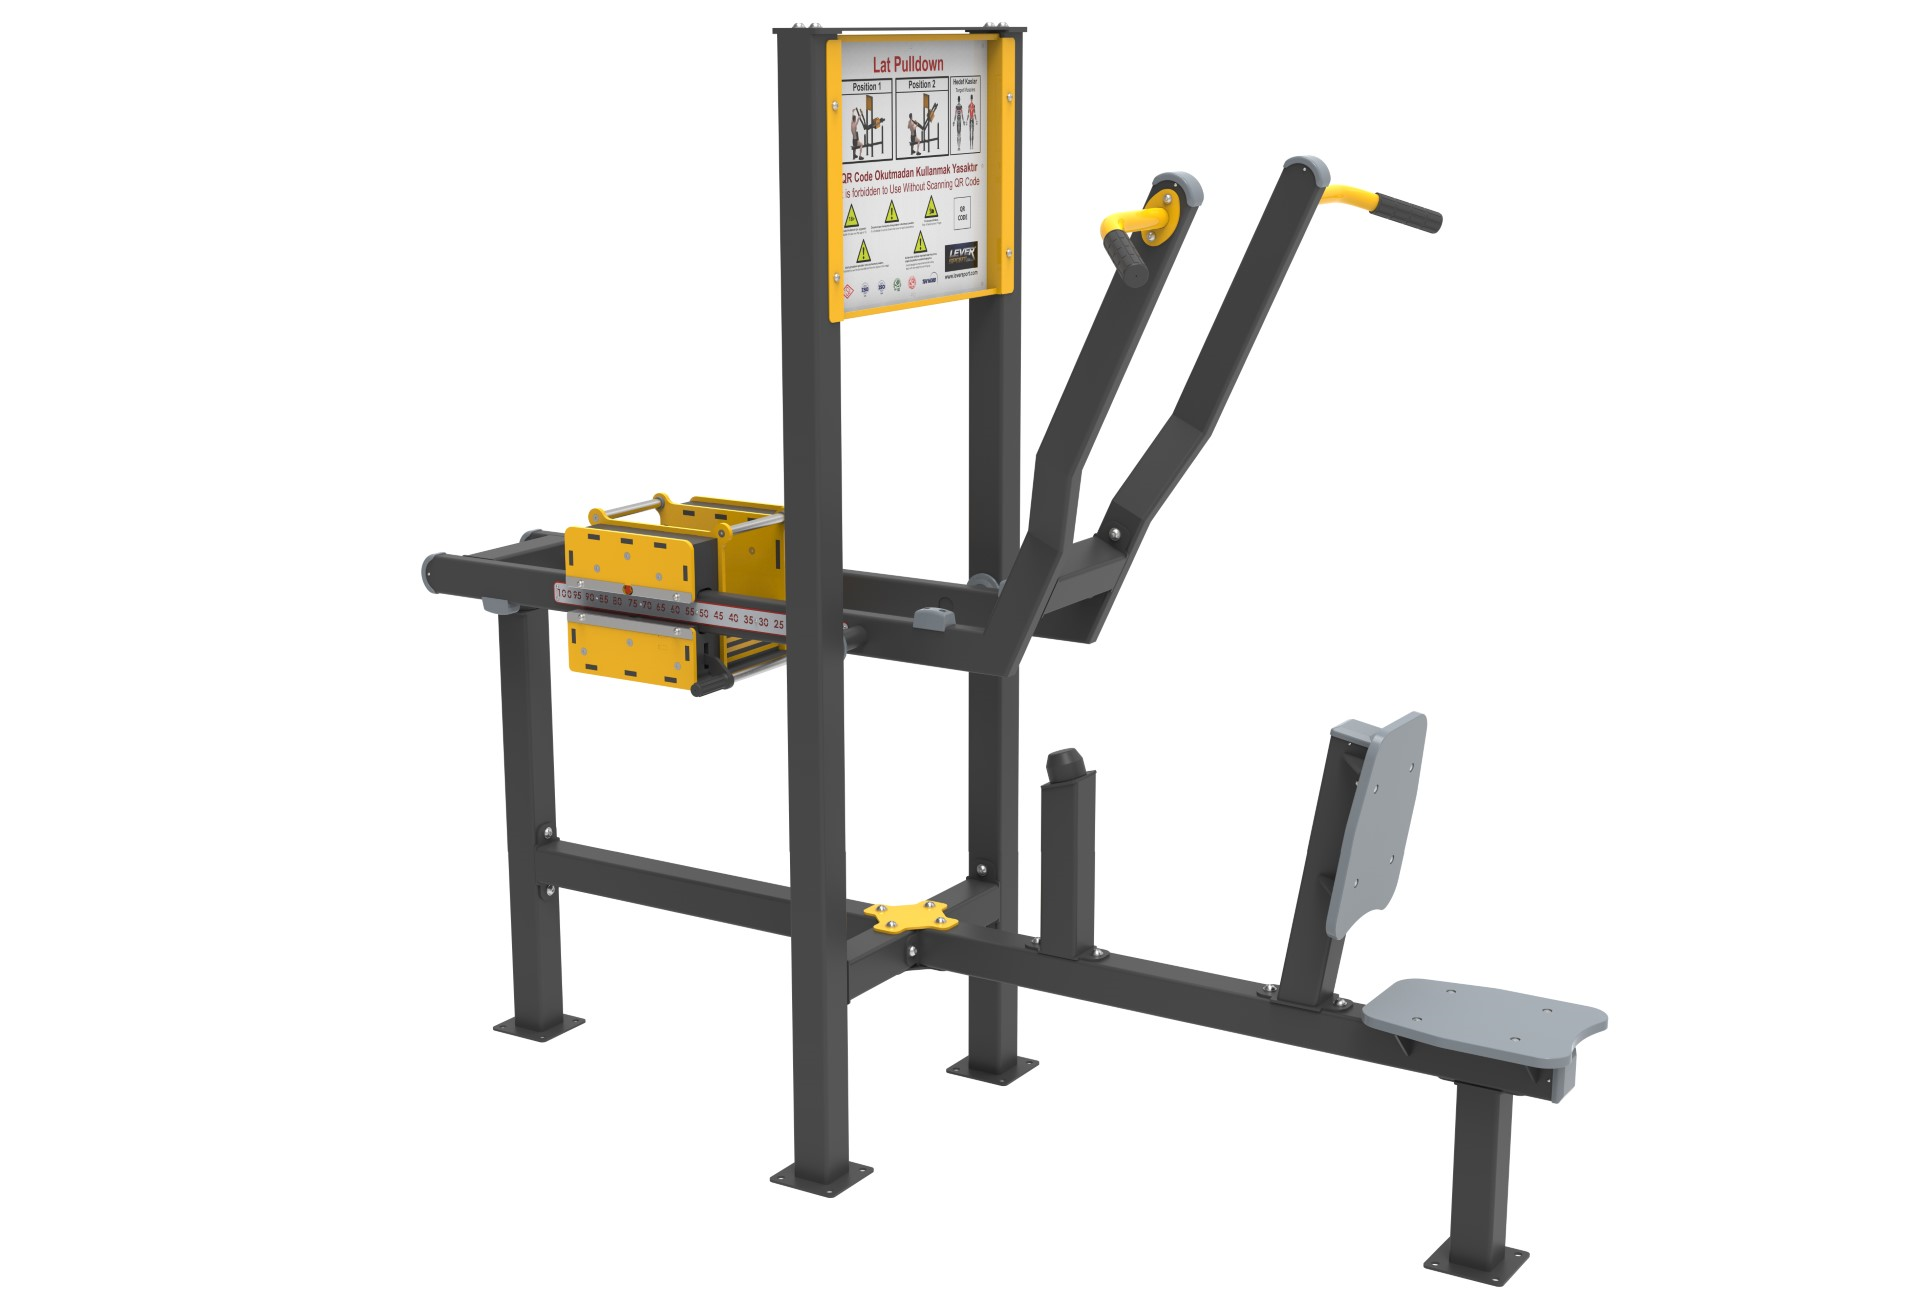 Fitness Series with Weight Lifting LAT PULLDOWN LKF 1170